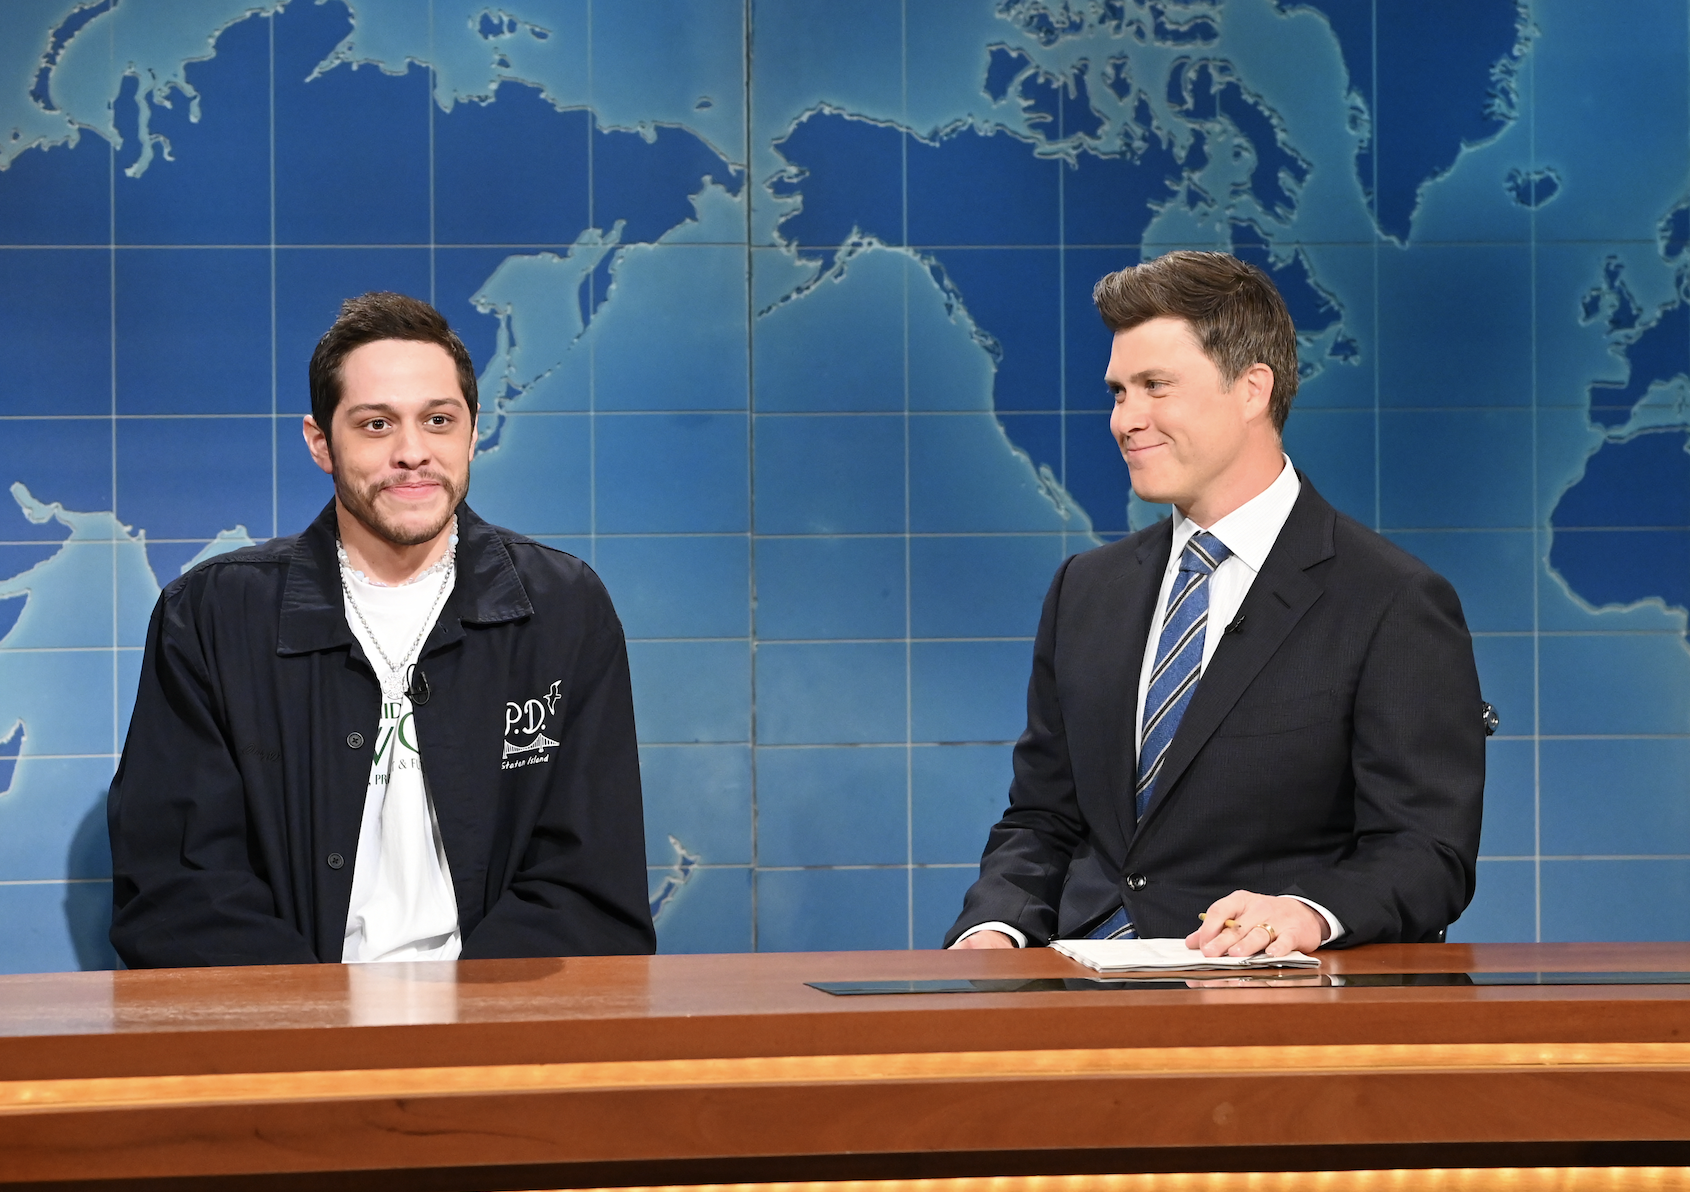 Pete Davidson on SNL&#x27;s Weekend Update with Colin Jost